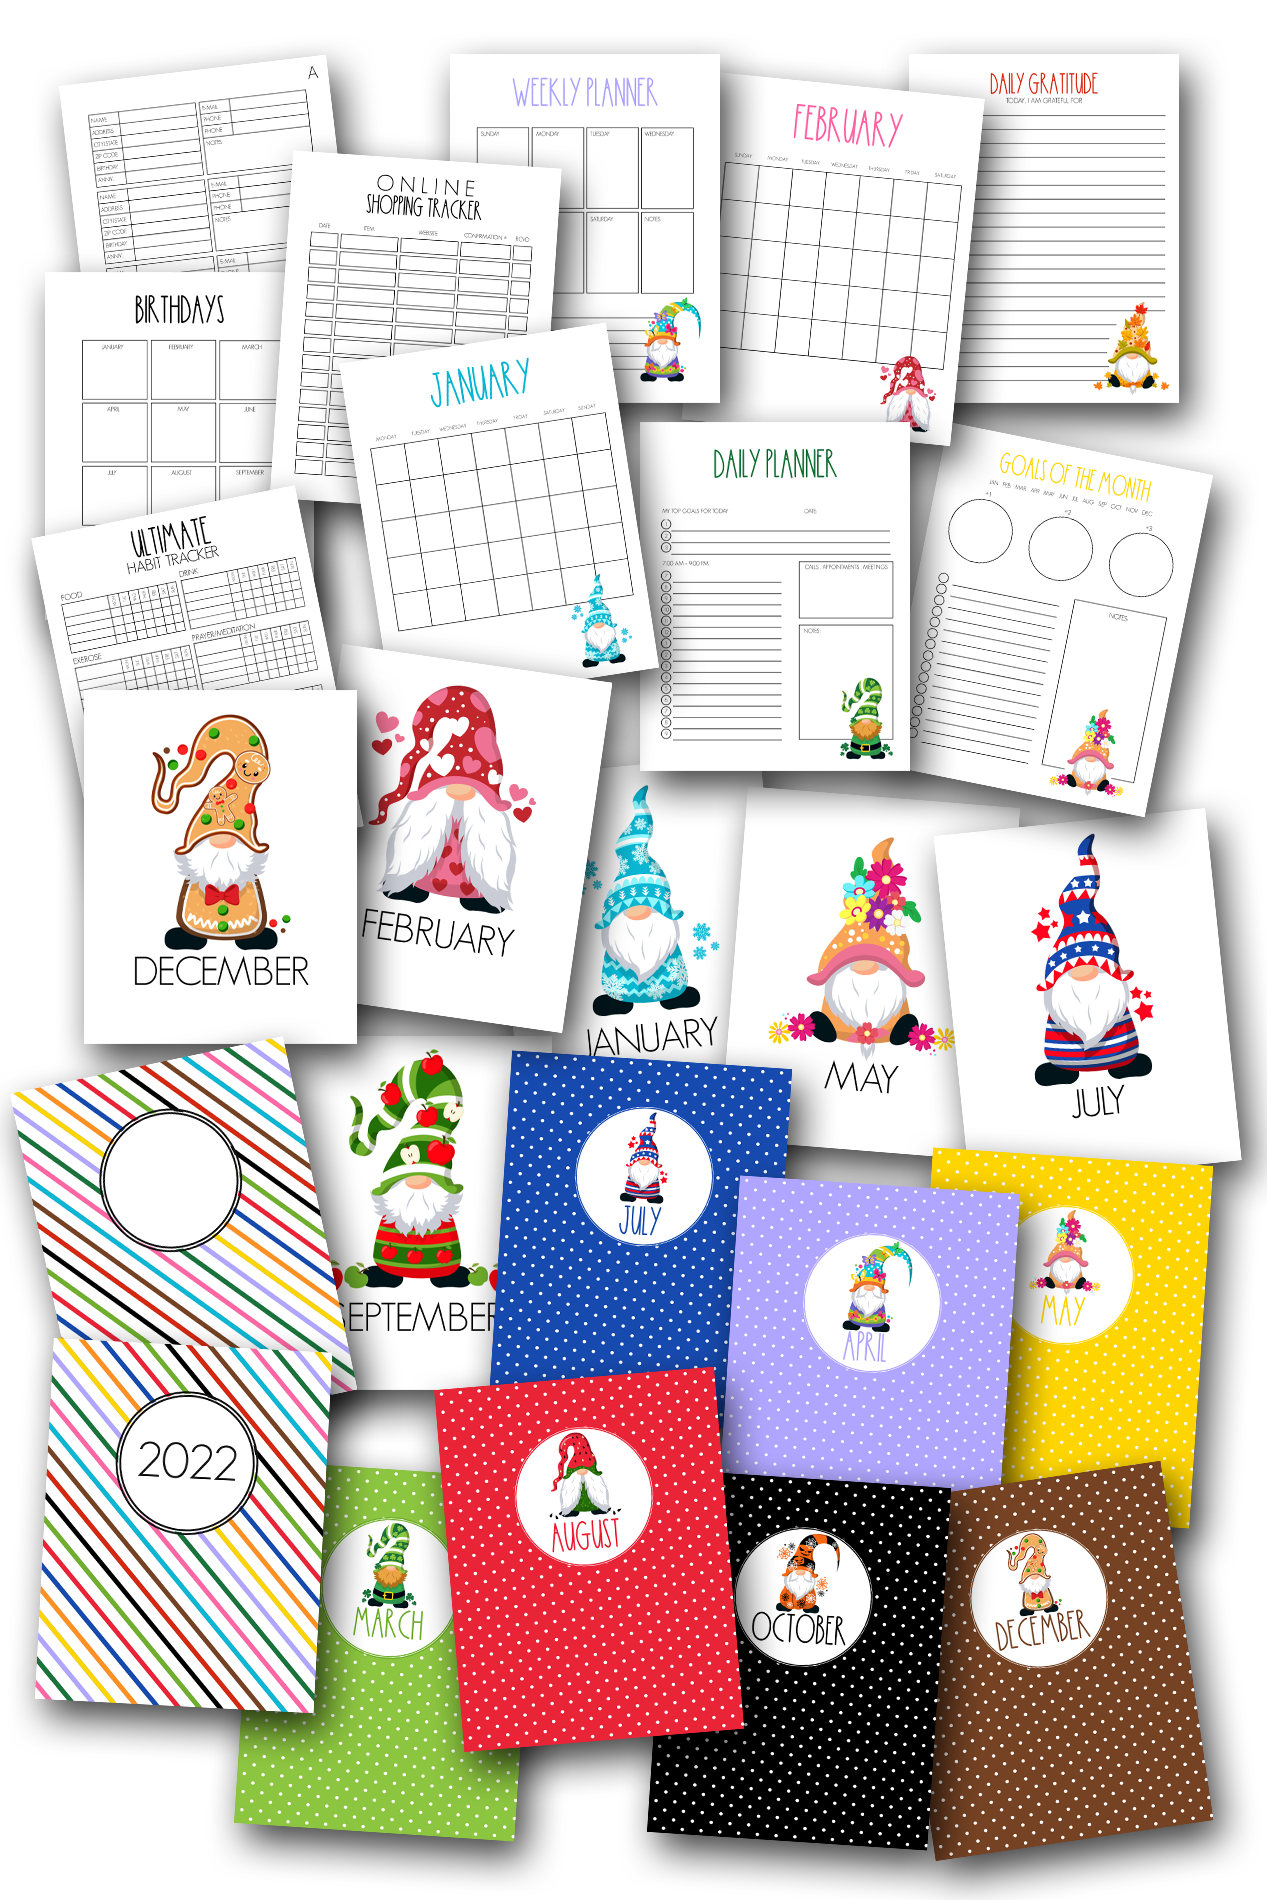 Year of the Gnome Home Organization Planner Journal